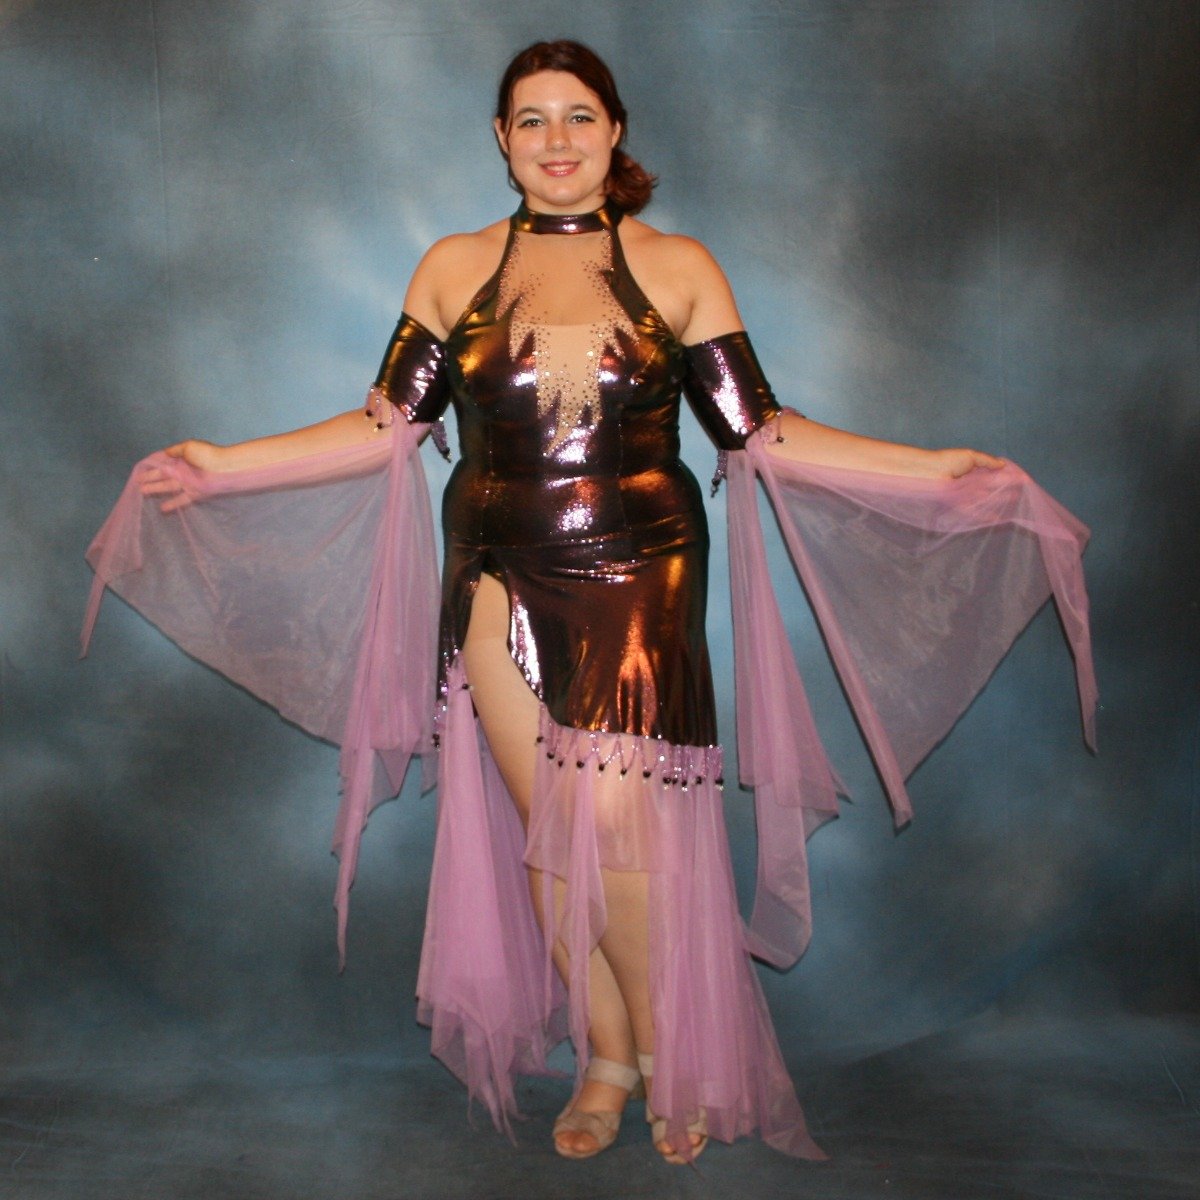 Crystal's Creations Metallic deep orchid/purple theatrical ballroom dress created in deep orchid/purple metallic lycra with orchid tricot chiffon panel skirt & floats, embellished with orchid Swarovski rhinestone work in bodice, along with hand beading at skirt edge & arm bands.